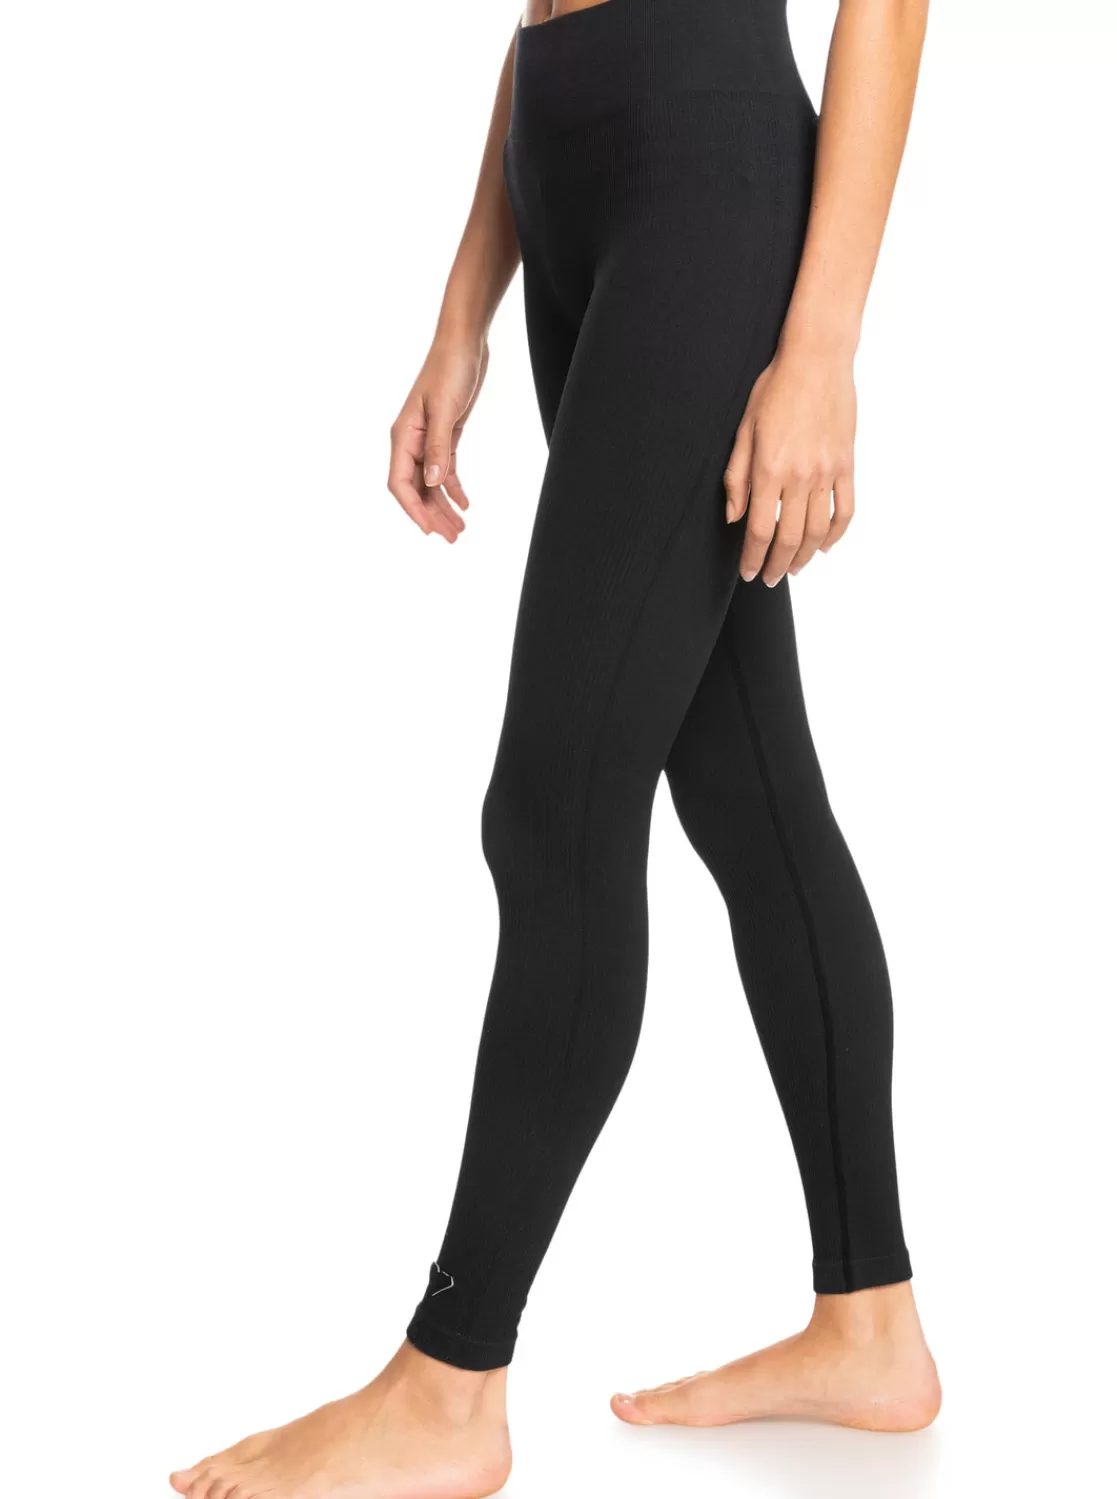 Chill Out Seamless Technical Leggings-ROXY Fashion